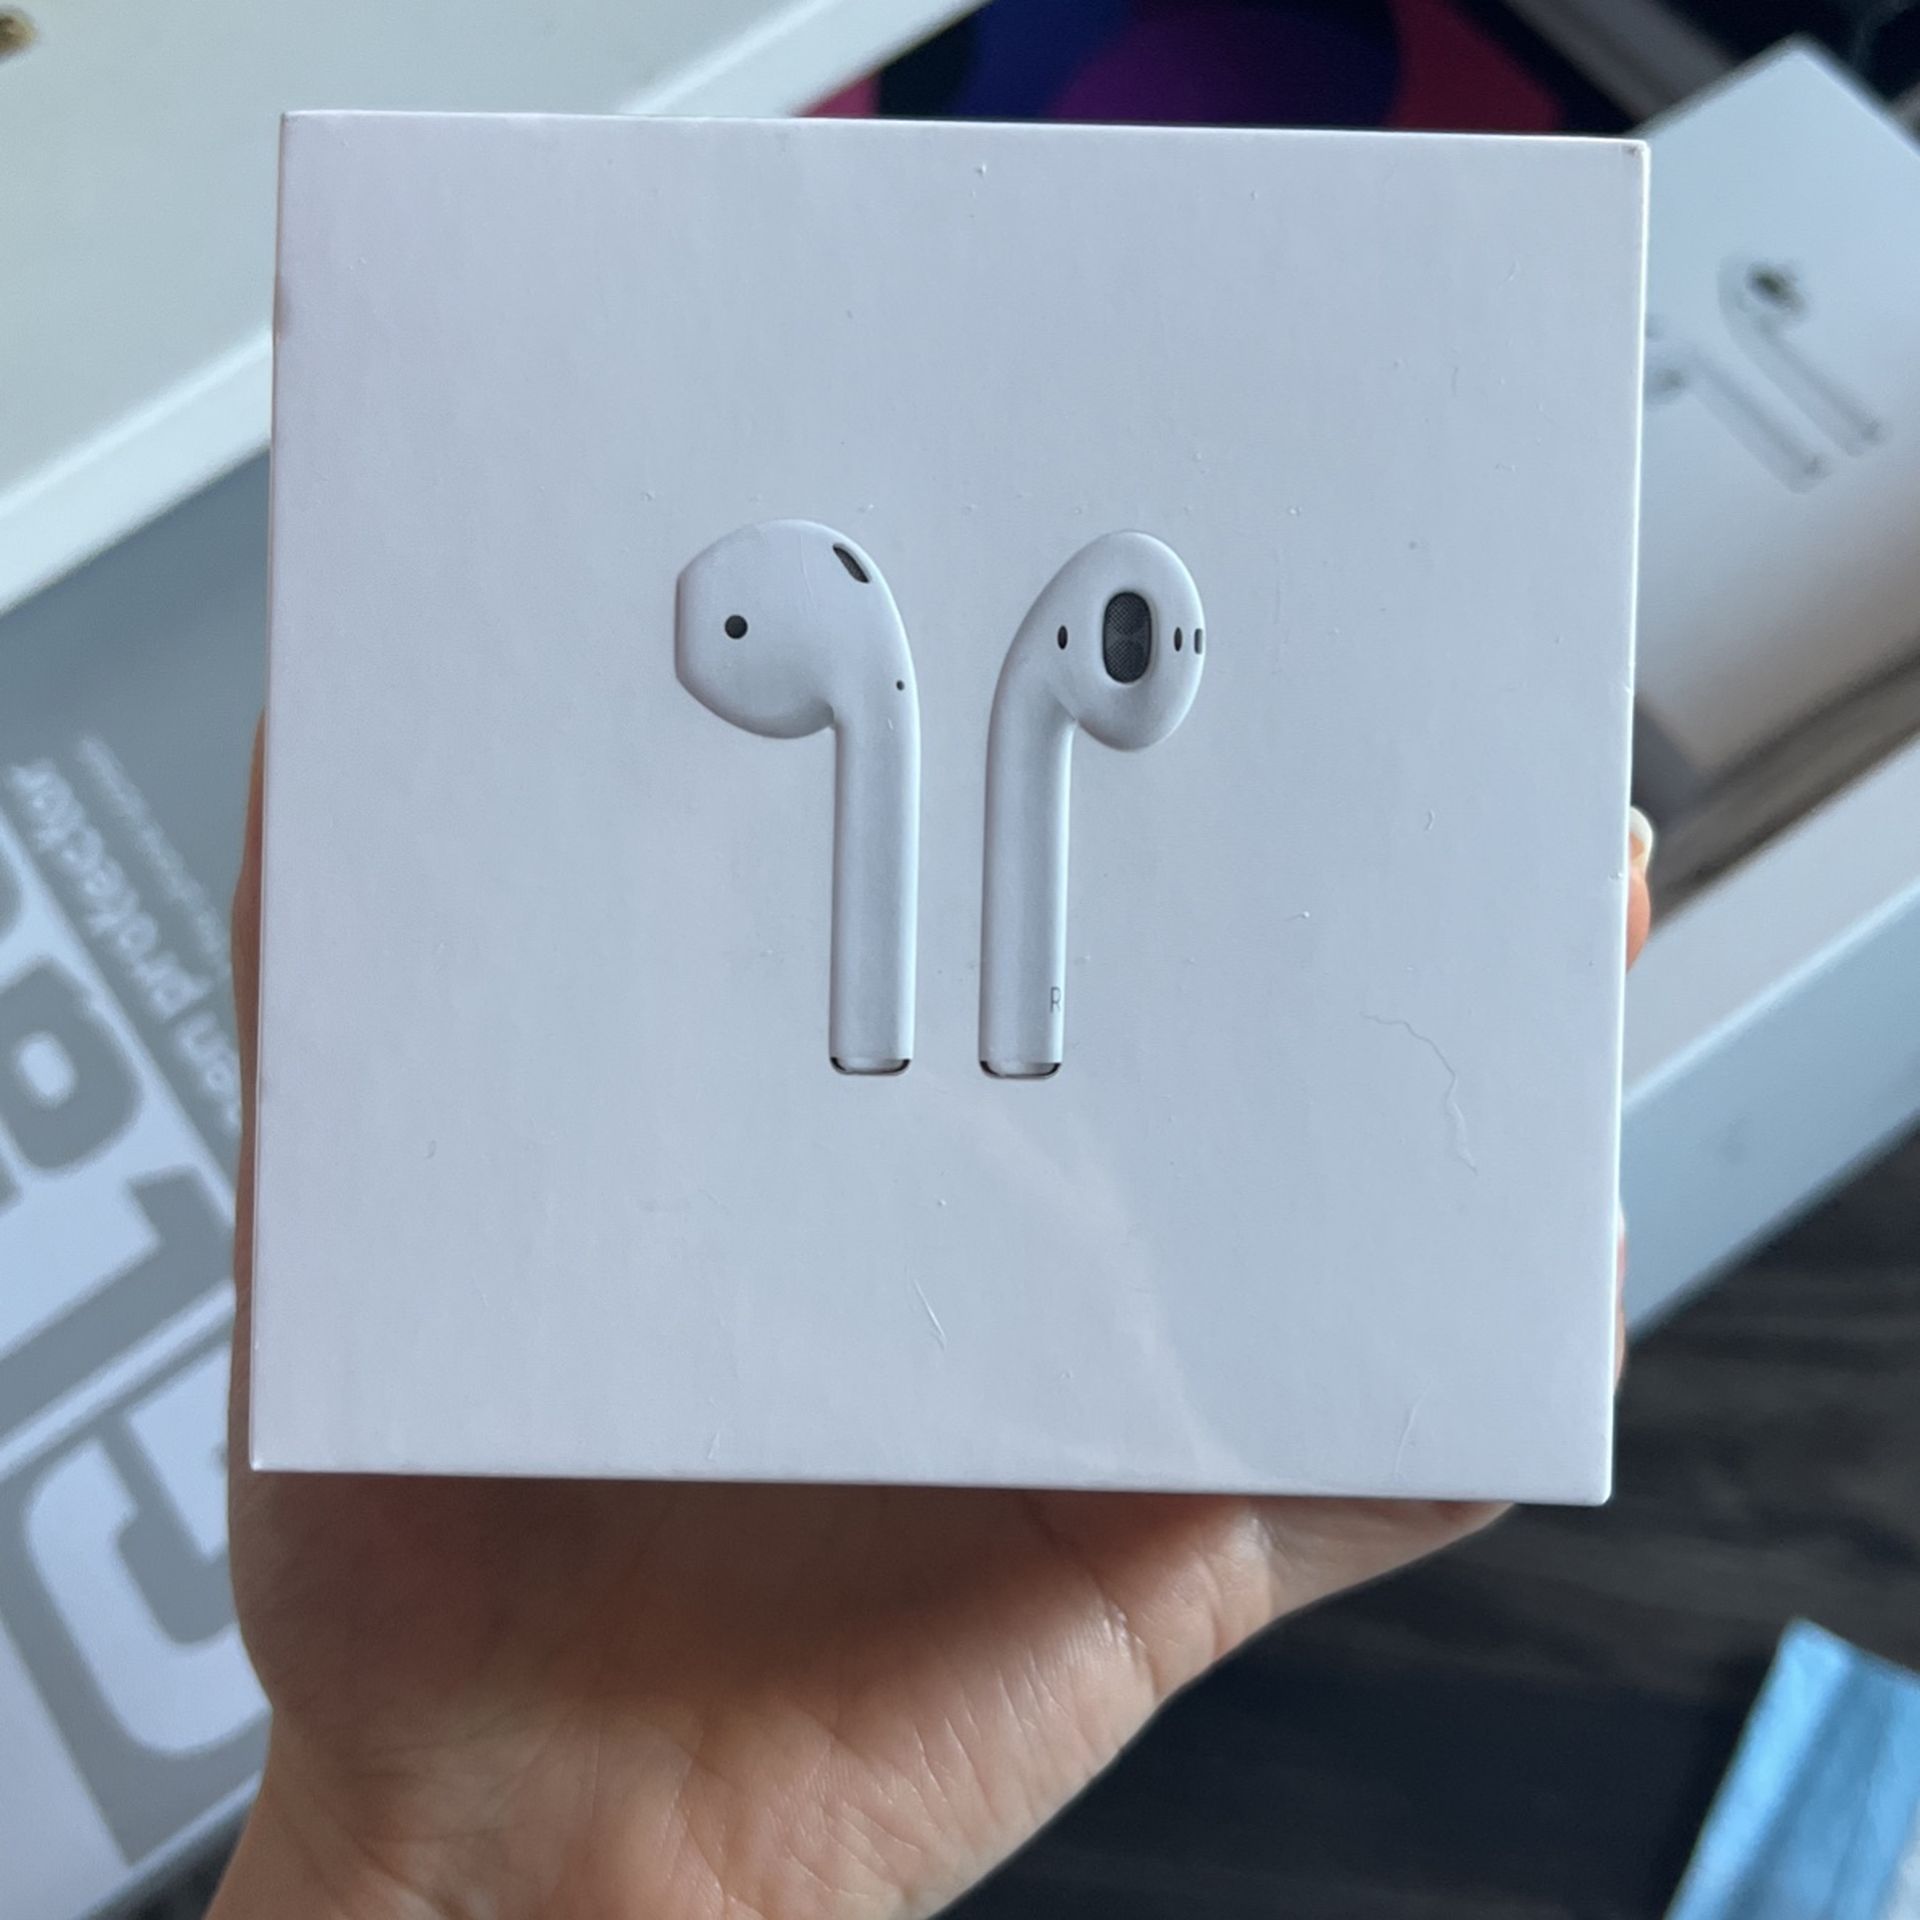 AirPods w Charging Case